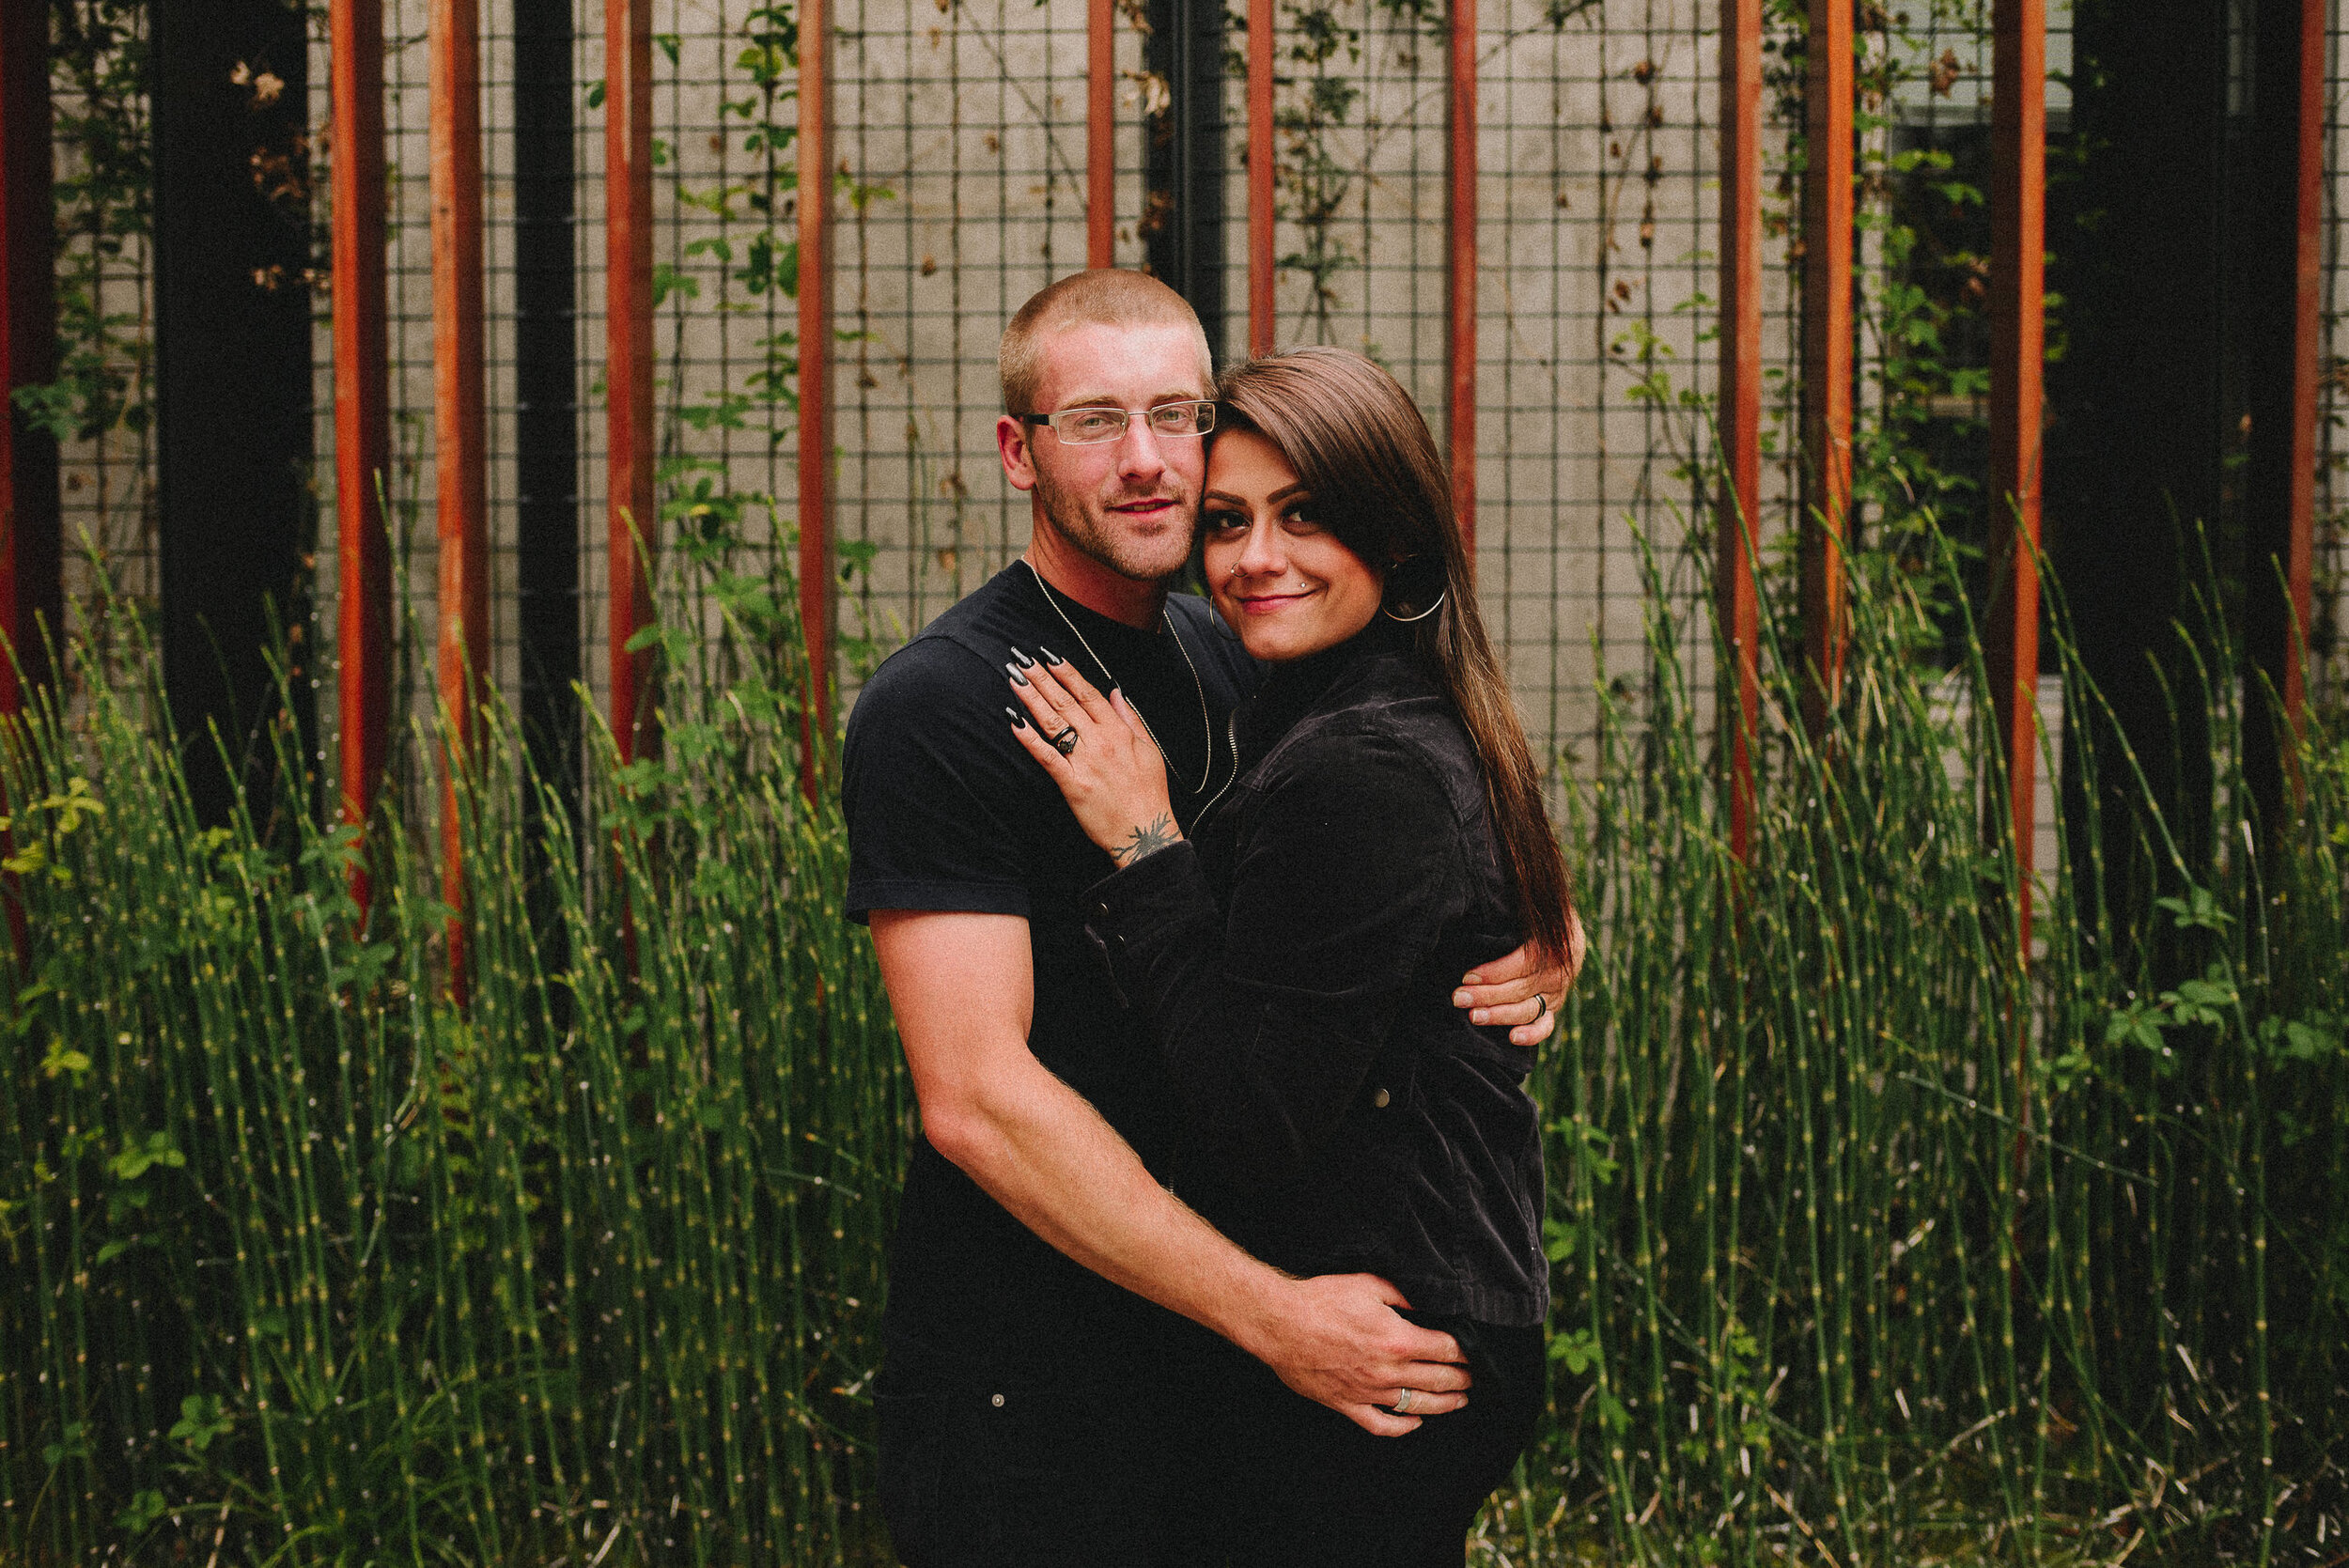 downtown-seattle-wa-engagement-session-way-up-north-photography (32).jpg